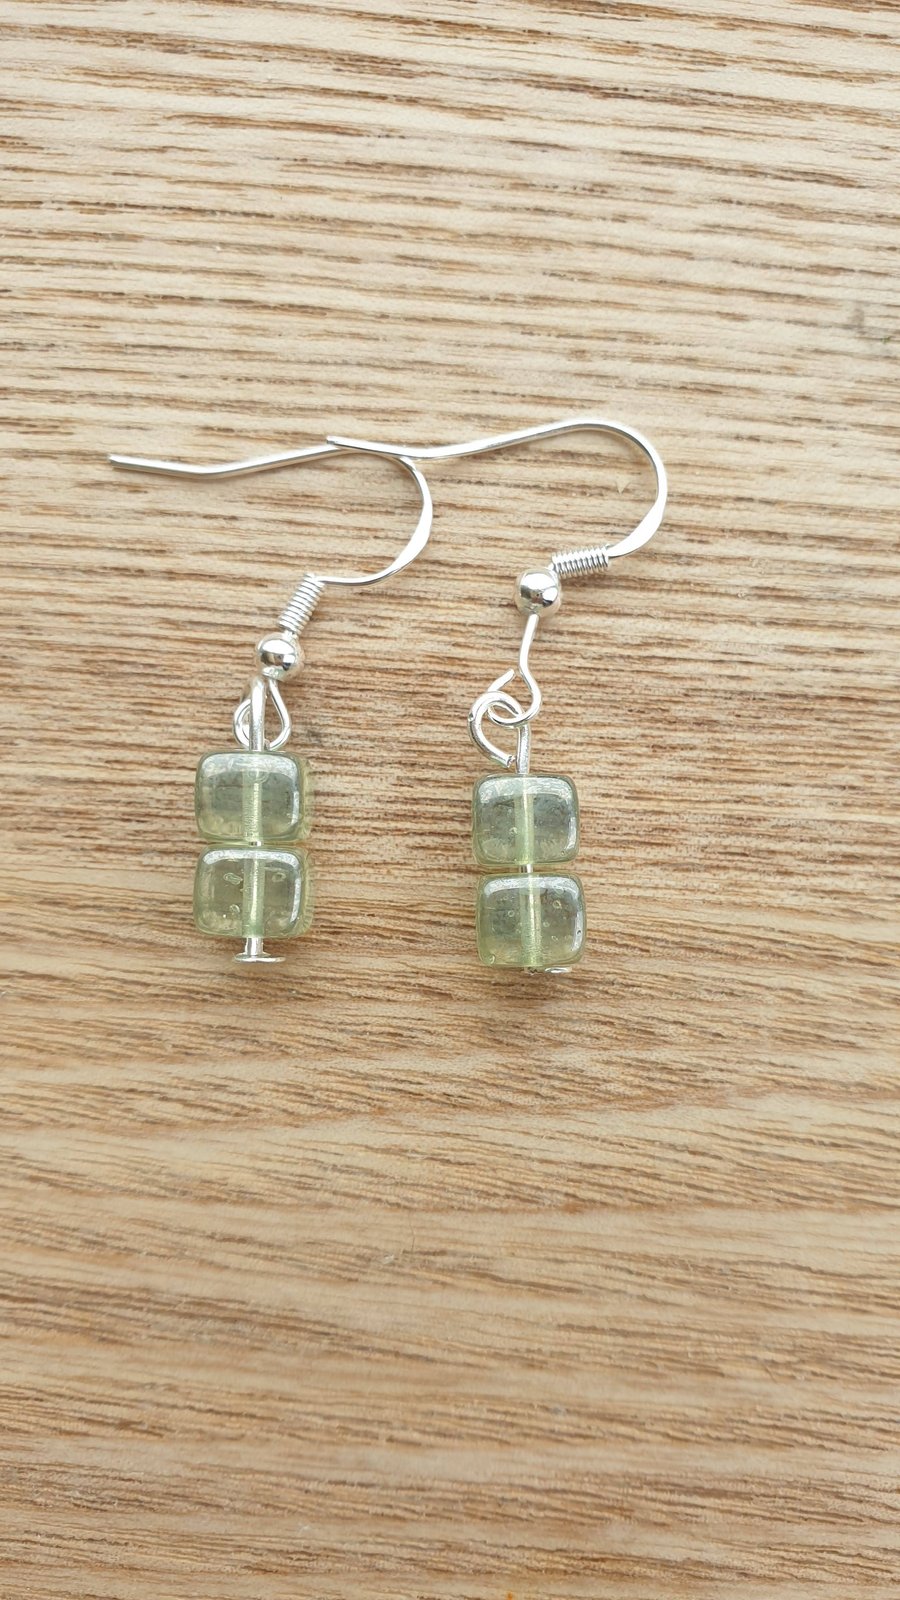 Green Recycled Glass Cube Bead Earrings on 925 Silver-Plated Ear Wires